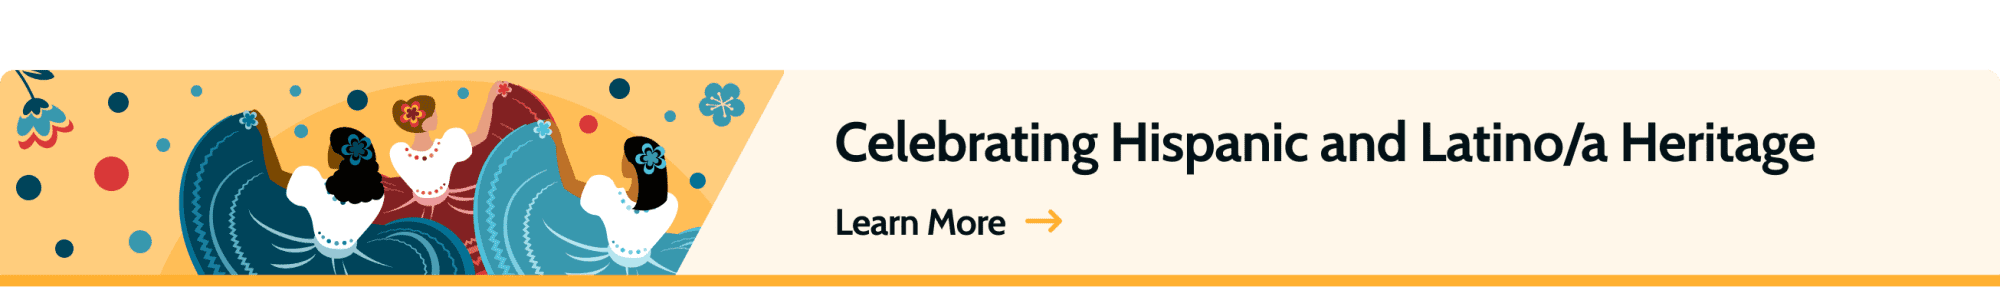 Go to BestColleges Hispanic Heritage Month hub to find more stories and resources.